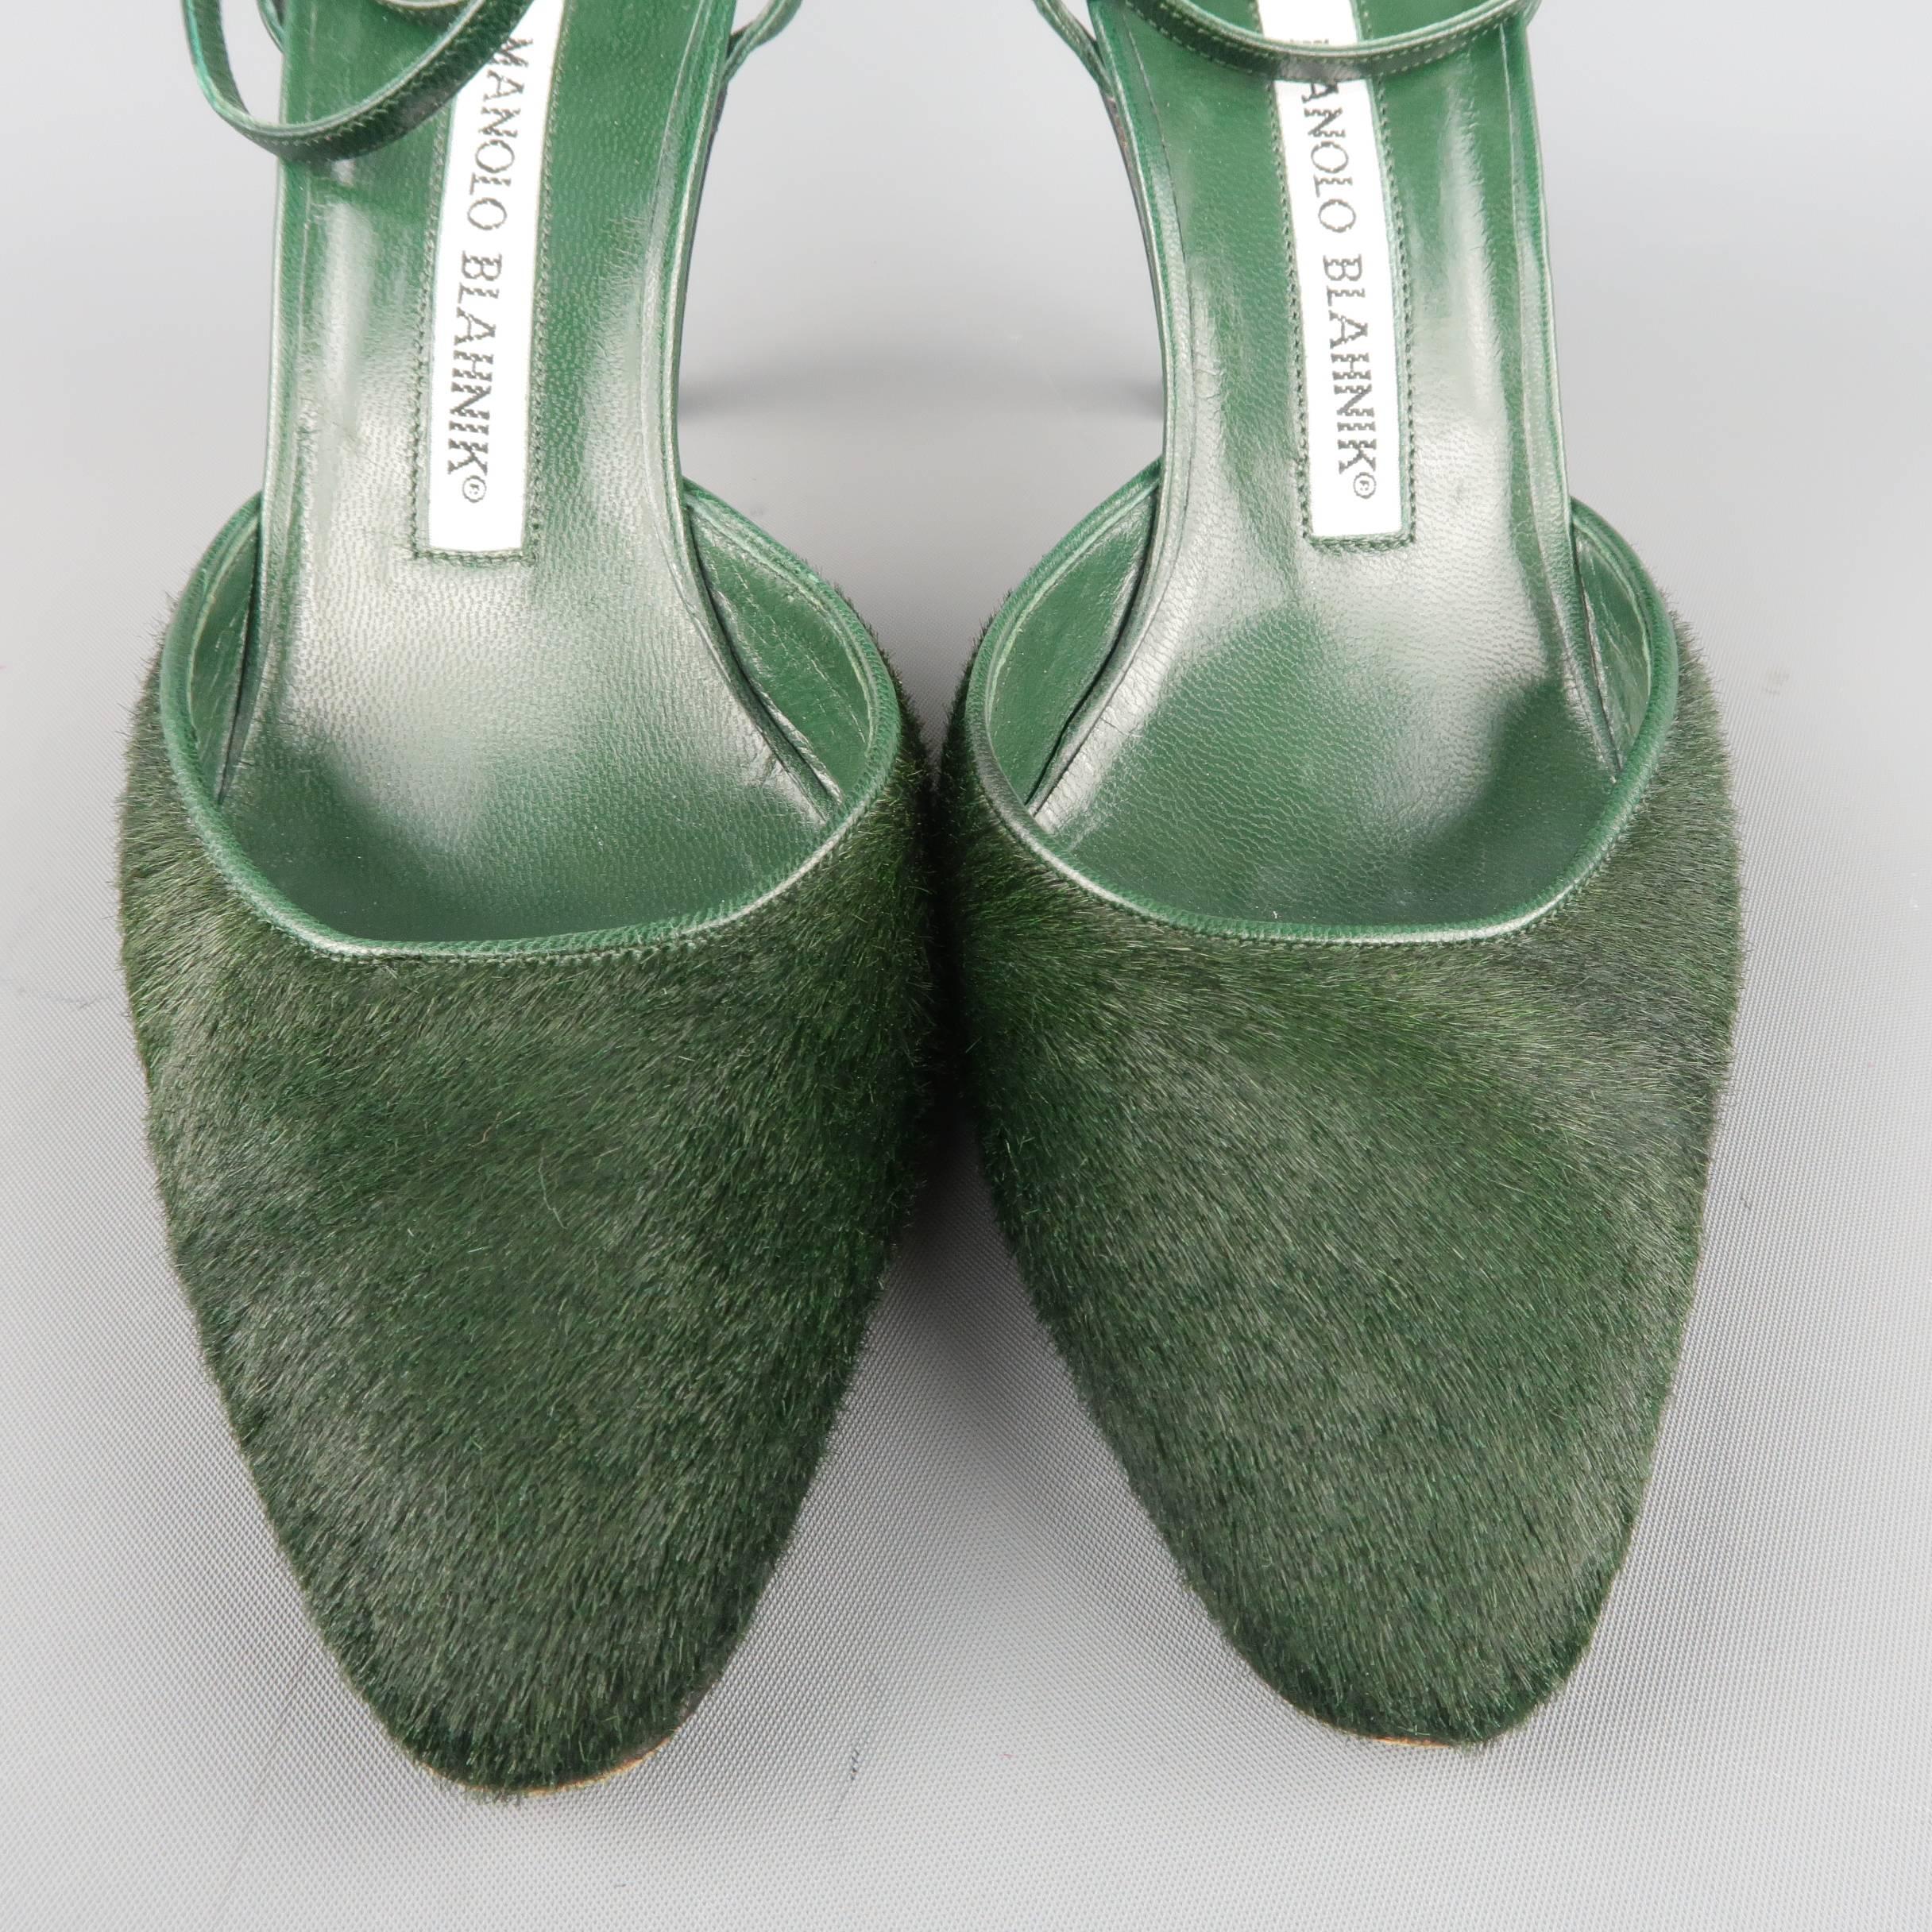 MANOLO BLAHNIK pumps come in green leather with a pointed, ponyhair toe, covered stiletto heel, and wrap ankle strap. Made in Italy.
 
Good Pre-Owned Condition.
Marked: IT 35.5
 
Measurements:
 
Heel: 3.5 in.